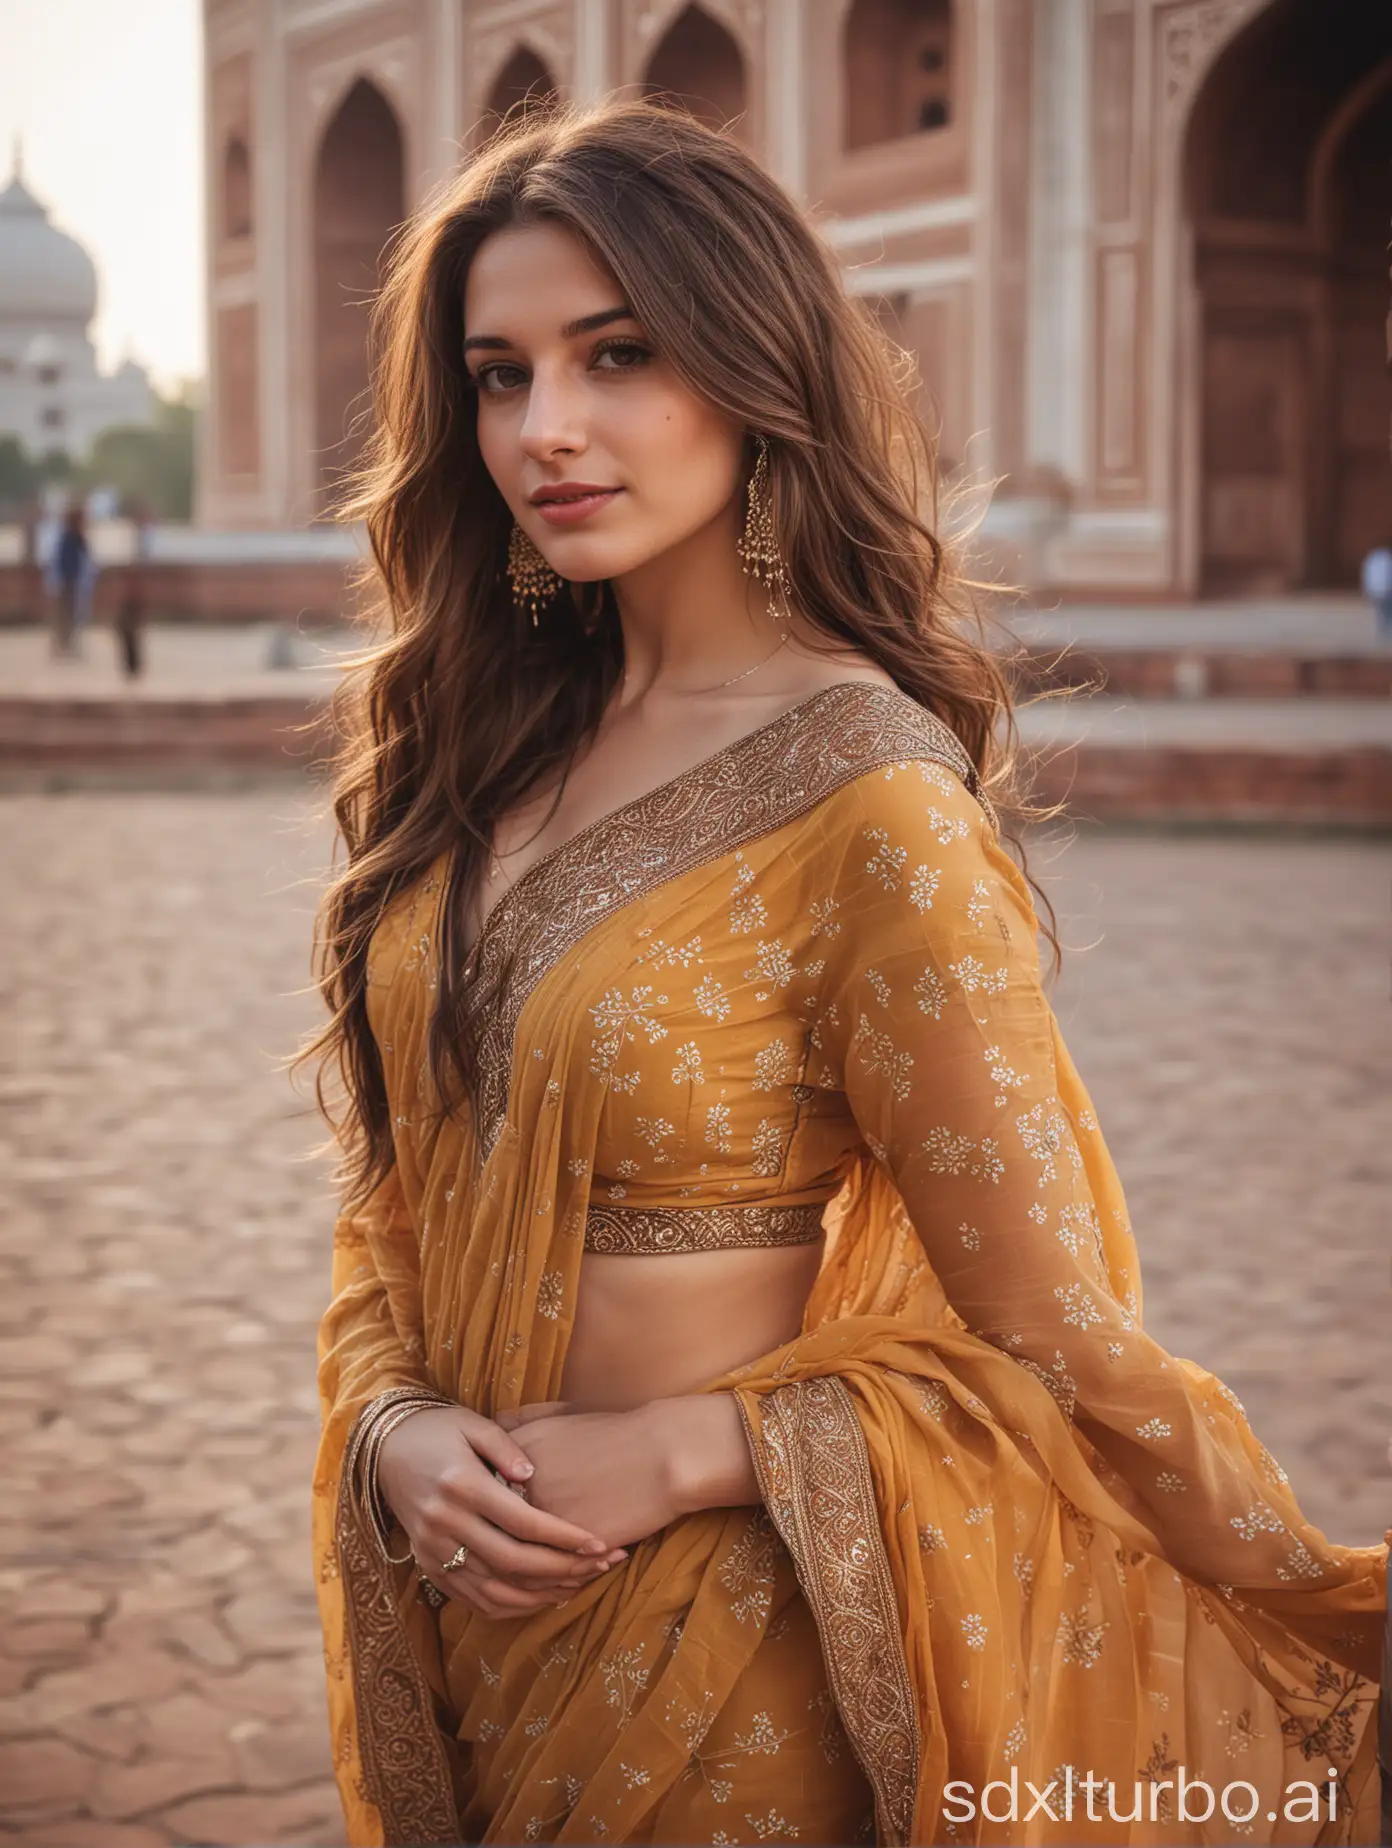 Sexy-Caucasian-Woman-in-Saree-Posing-in-Front-of-Taj-Mahal-with-Bokeh-Background